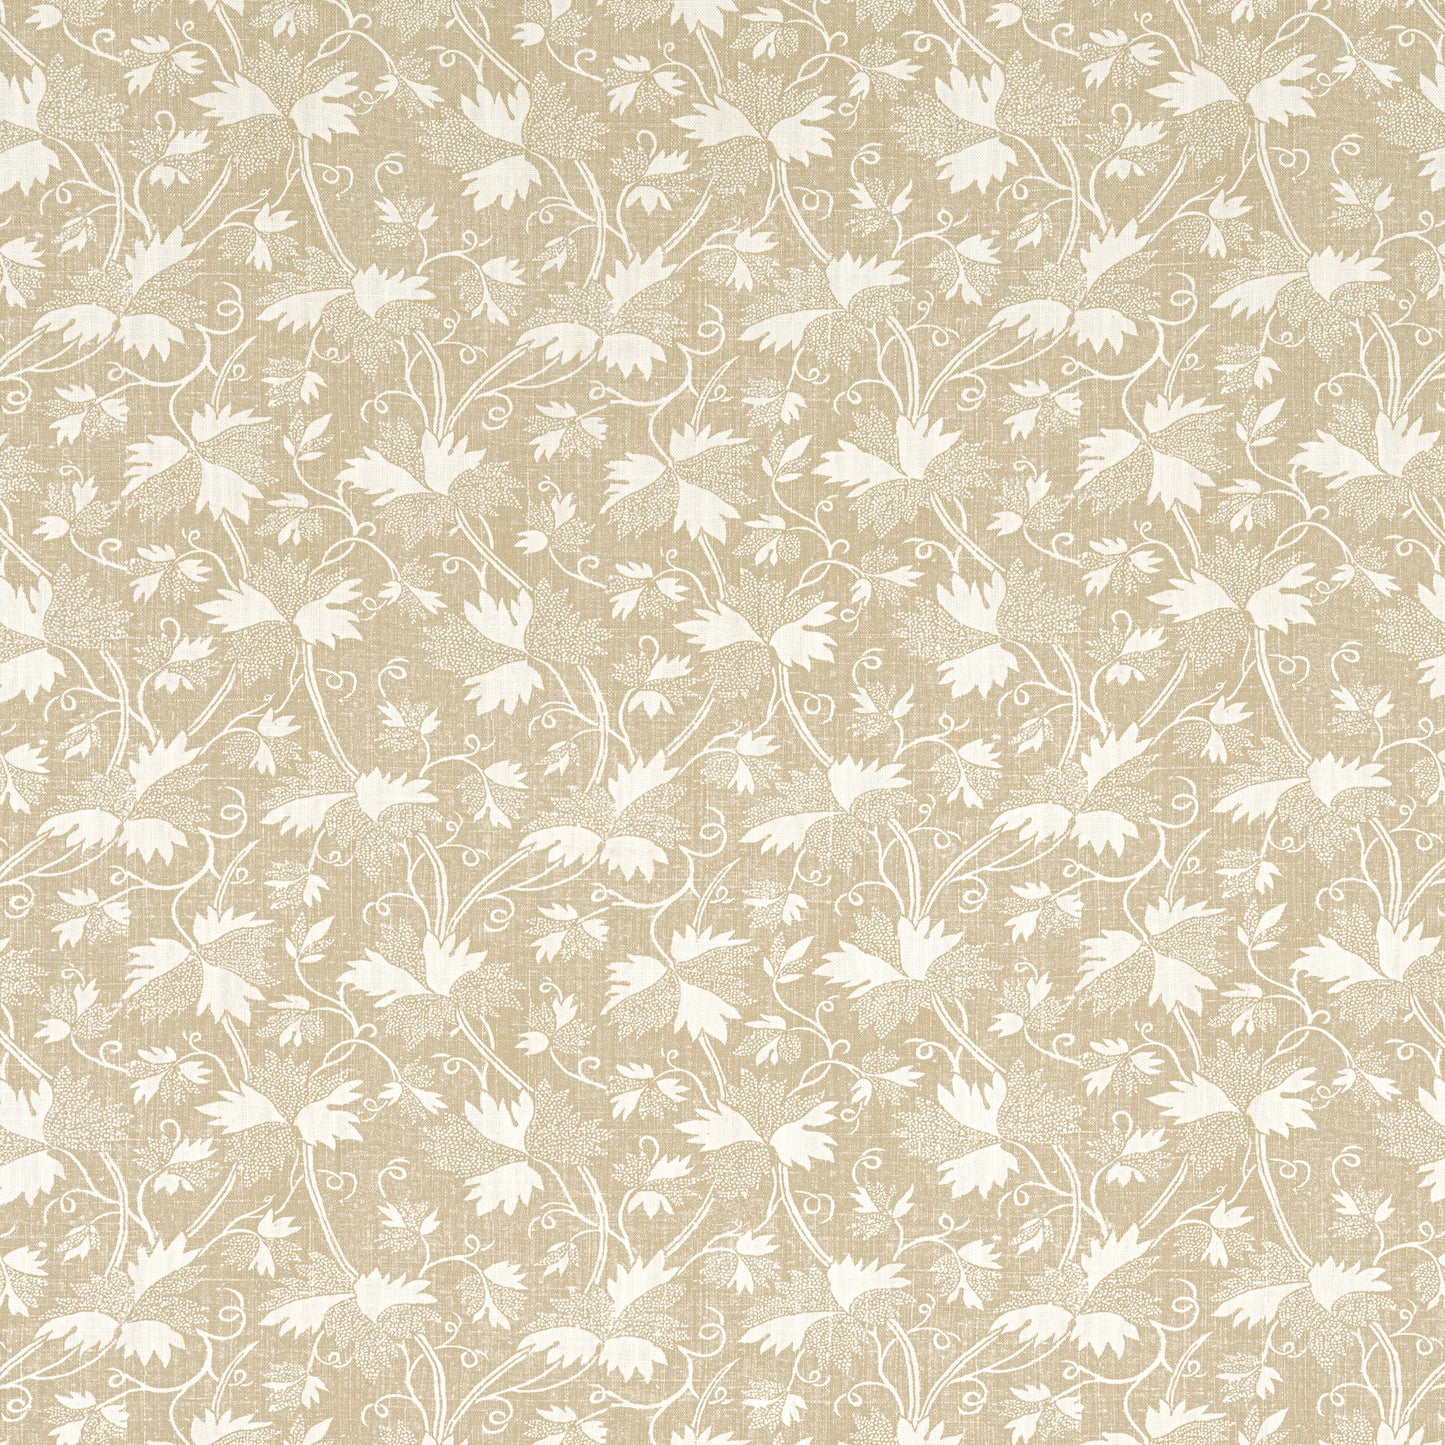 Purchase Thibaut Fabric SKU F936436 pattern name Chester color Beige